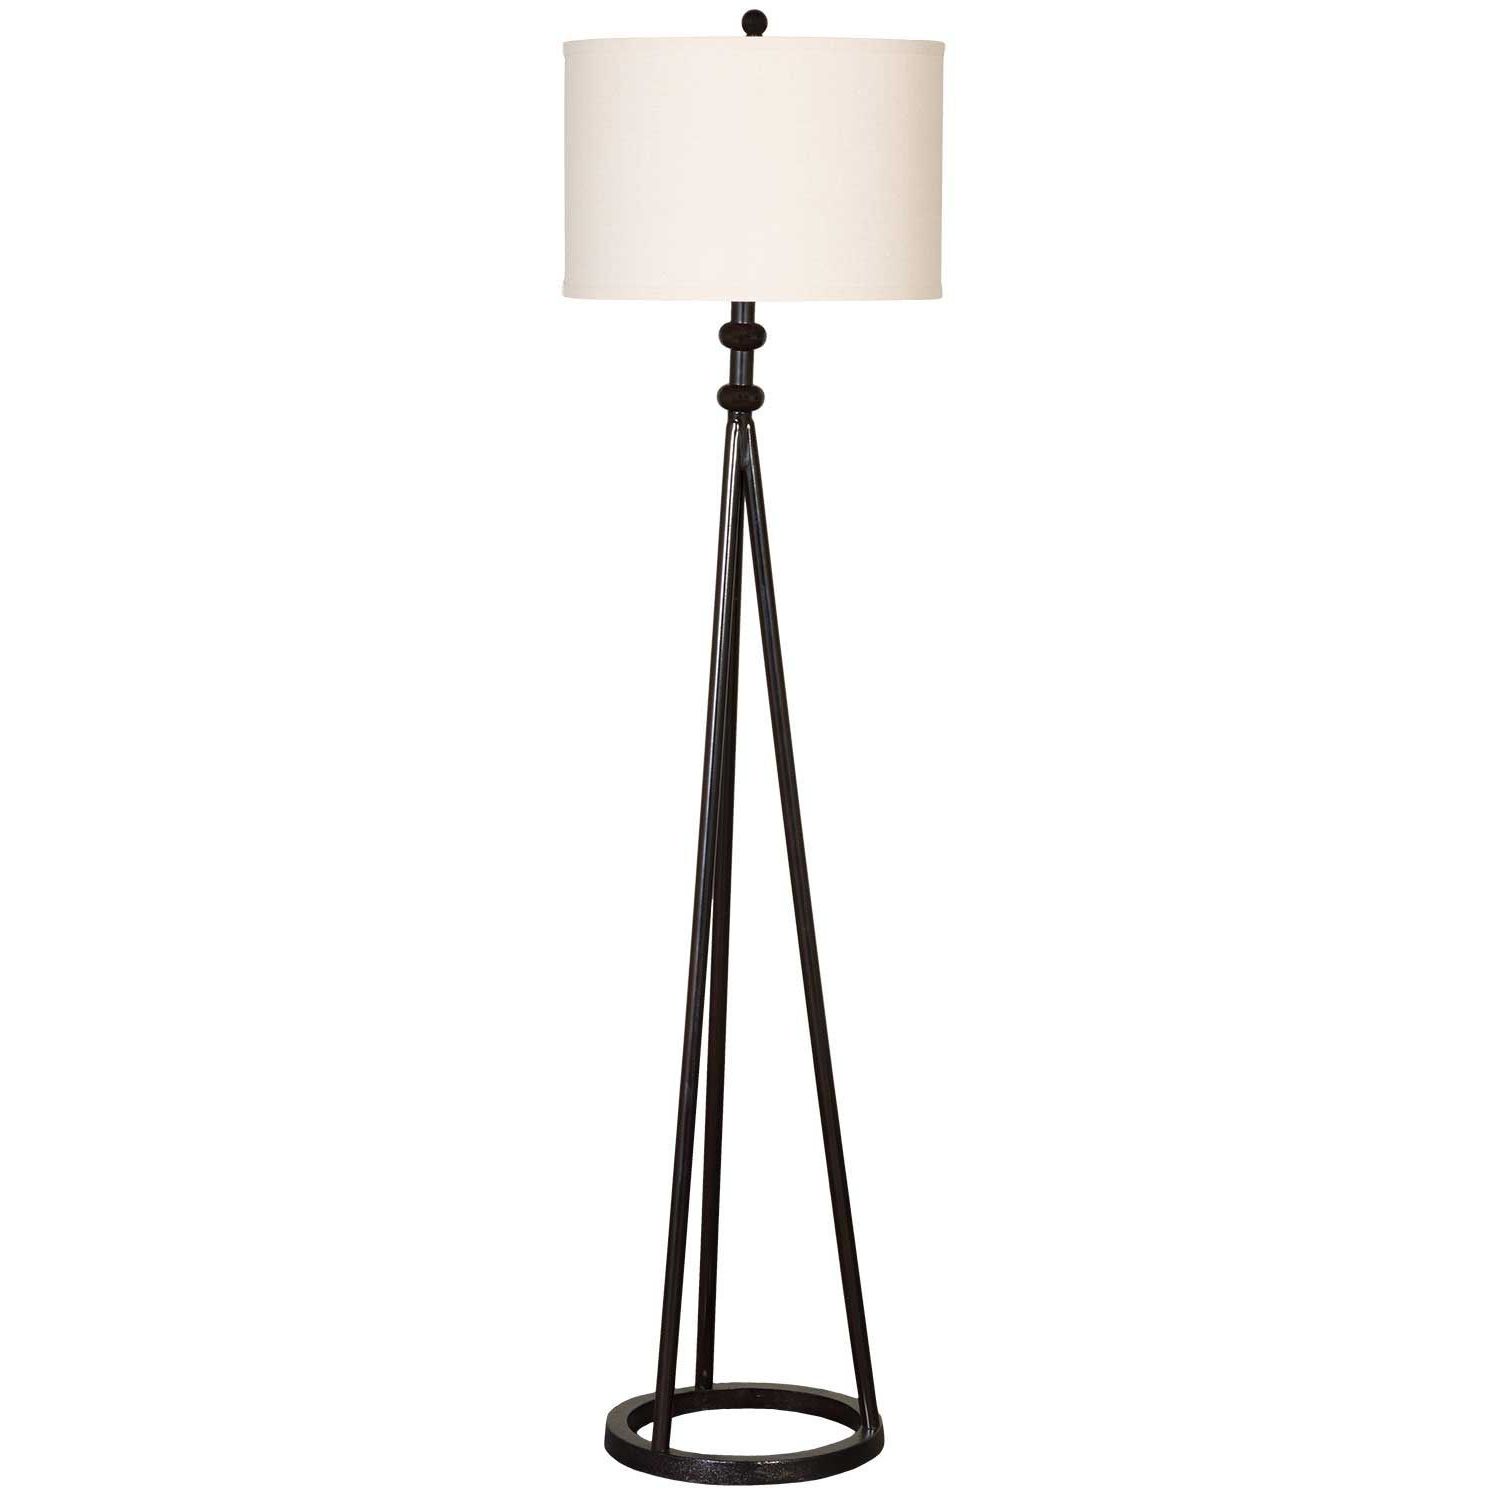 Black Iron Floor Lamp | Dl1000f | | Afw For Black Floor Lamps (Gallery 20 of 20)